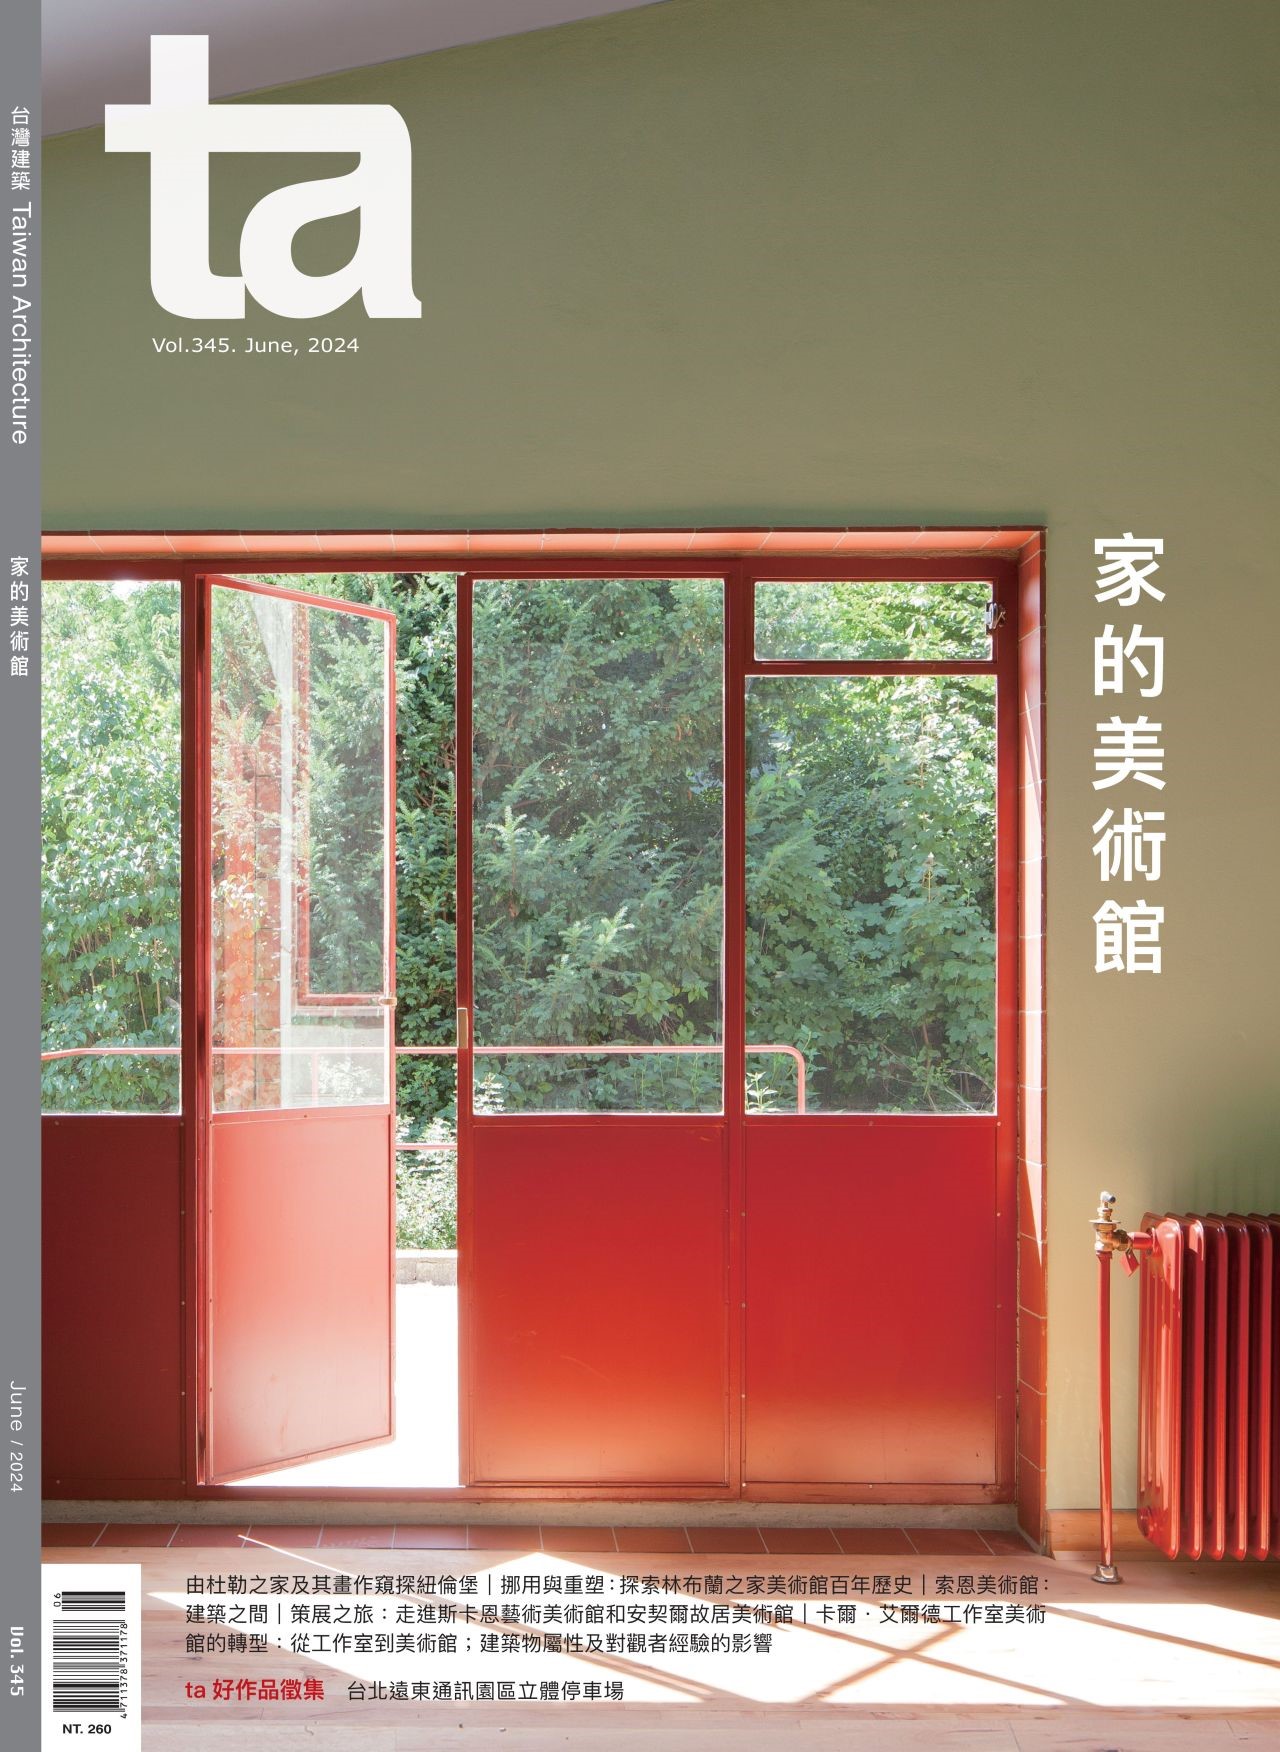 Cover image of June edition of Taiwan Architecture Magazine: Poul Henningsen's family home by Kurt Rodahl Hoppe, Realdania By & Byg.